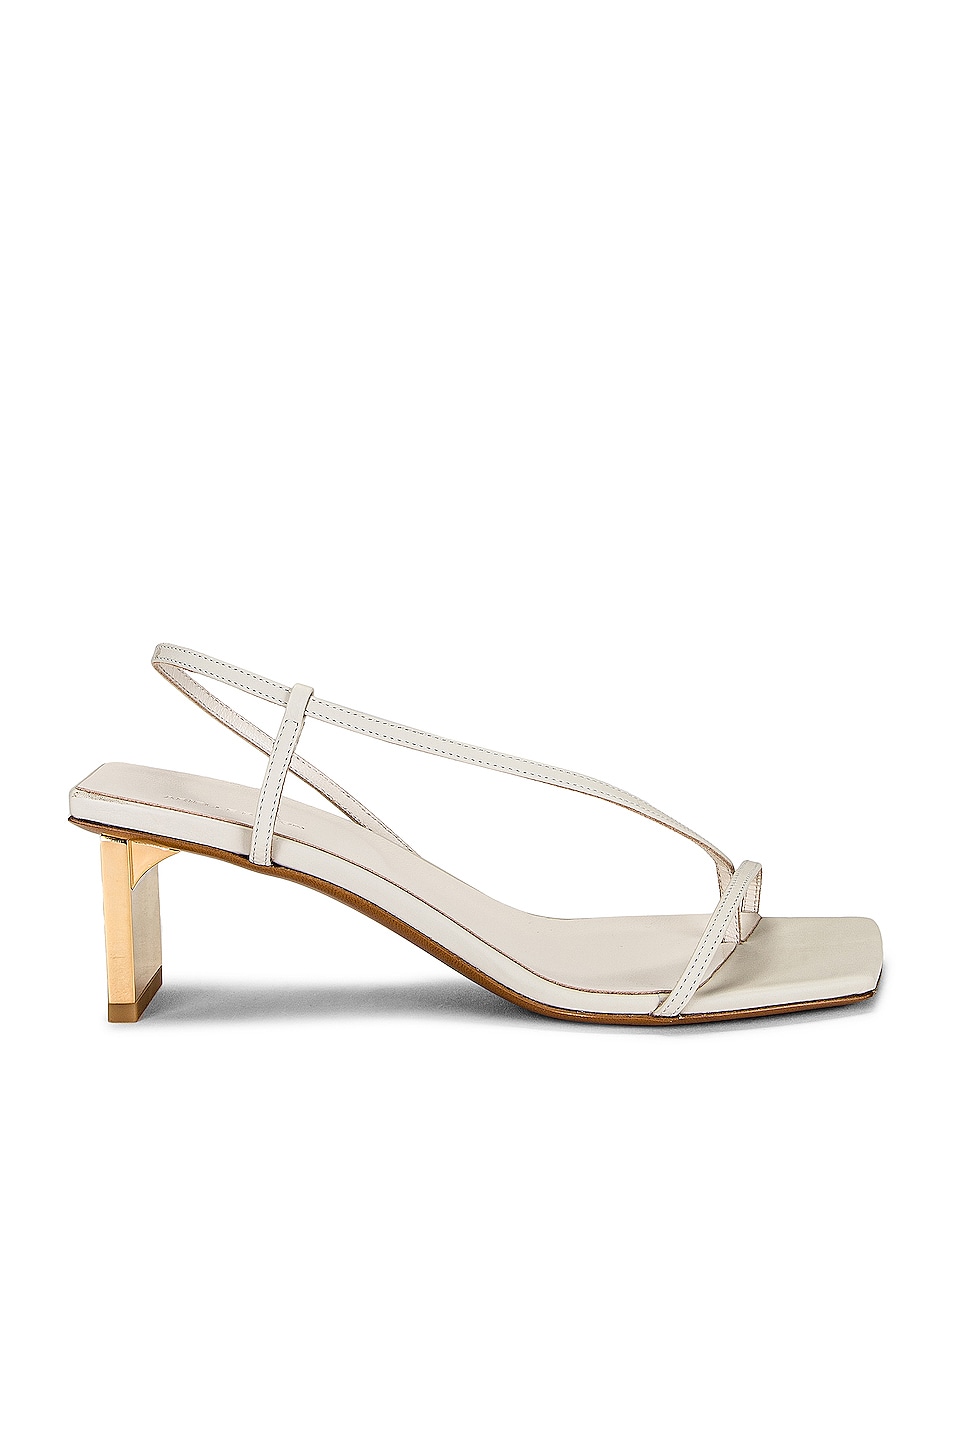 Image 1 of Arielle Baron Narcissus 55 Heel in Ivory